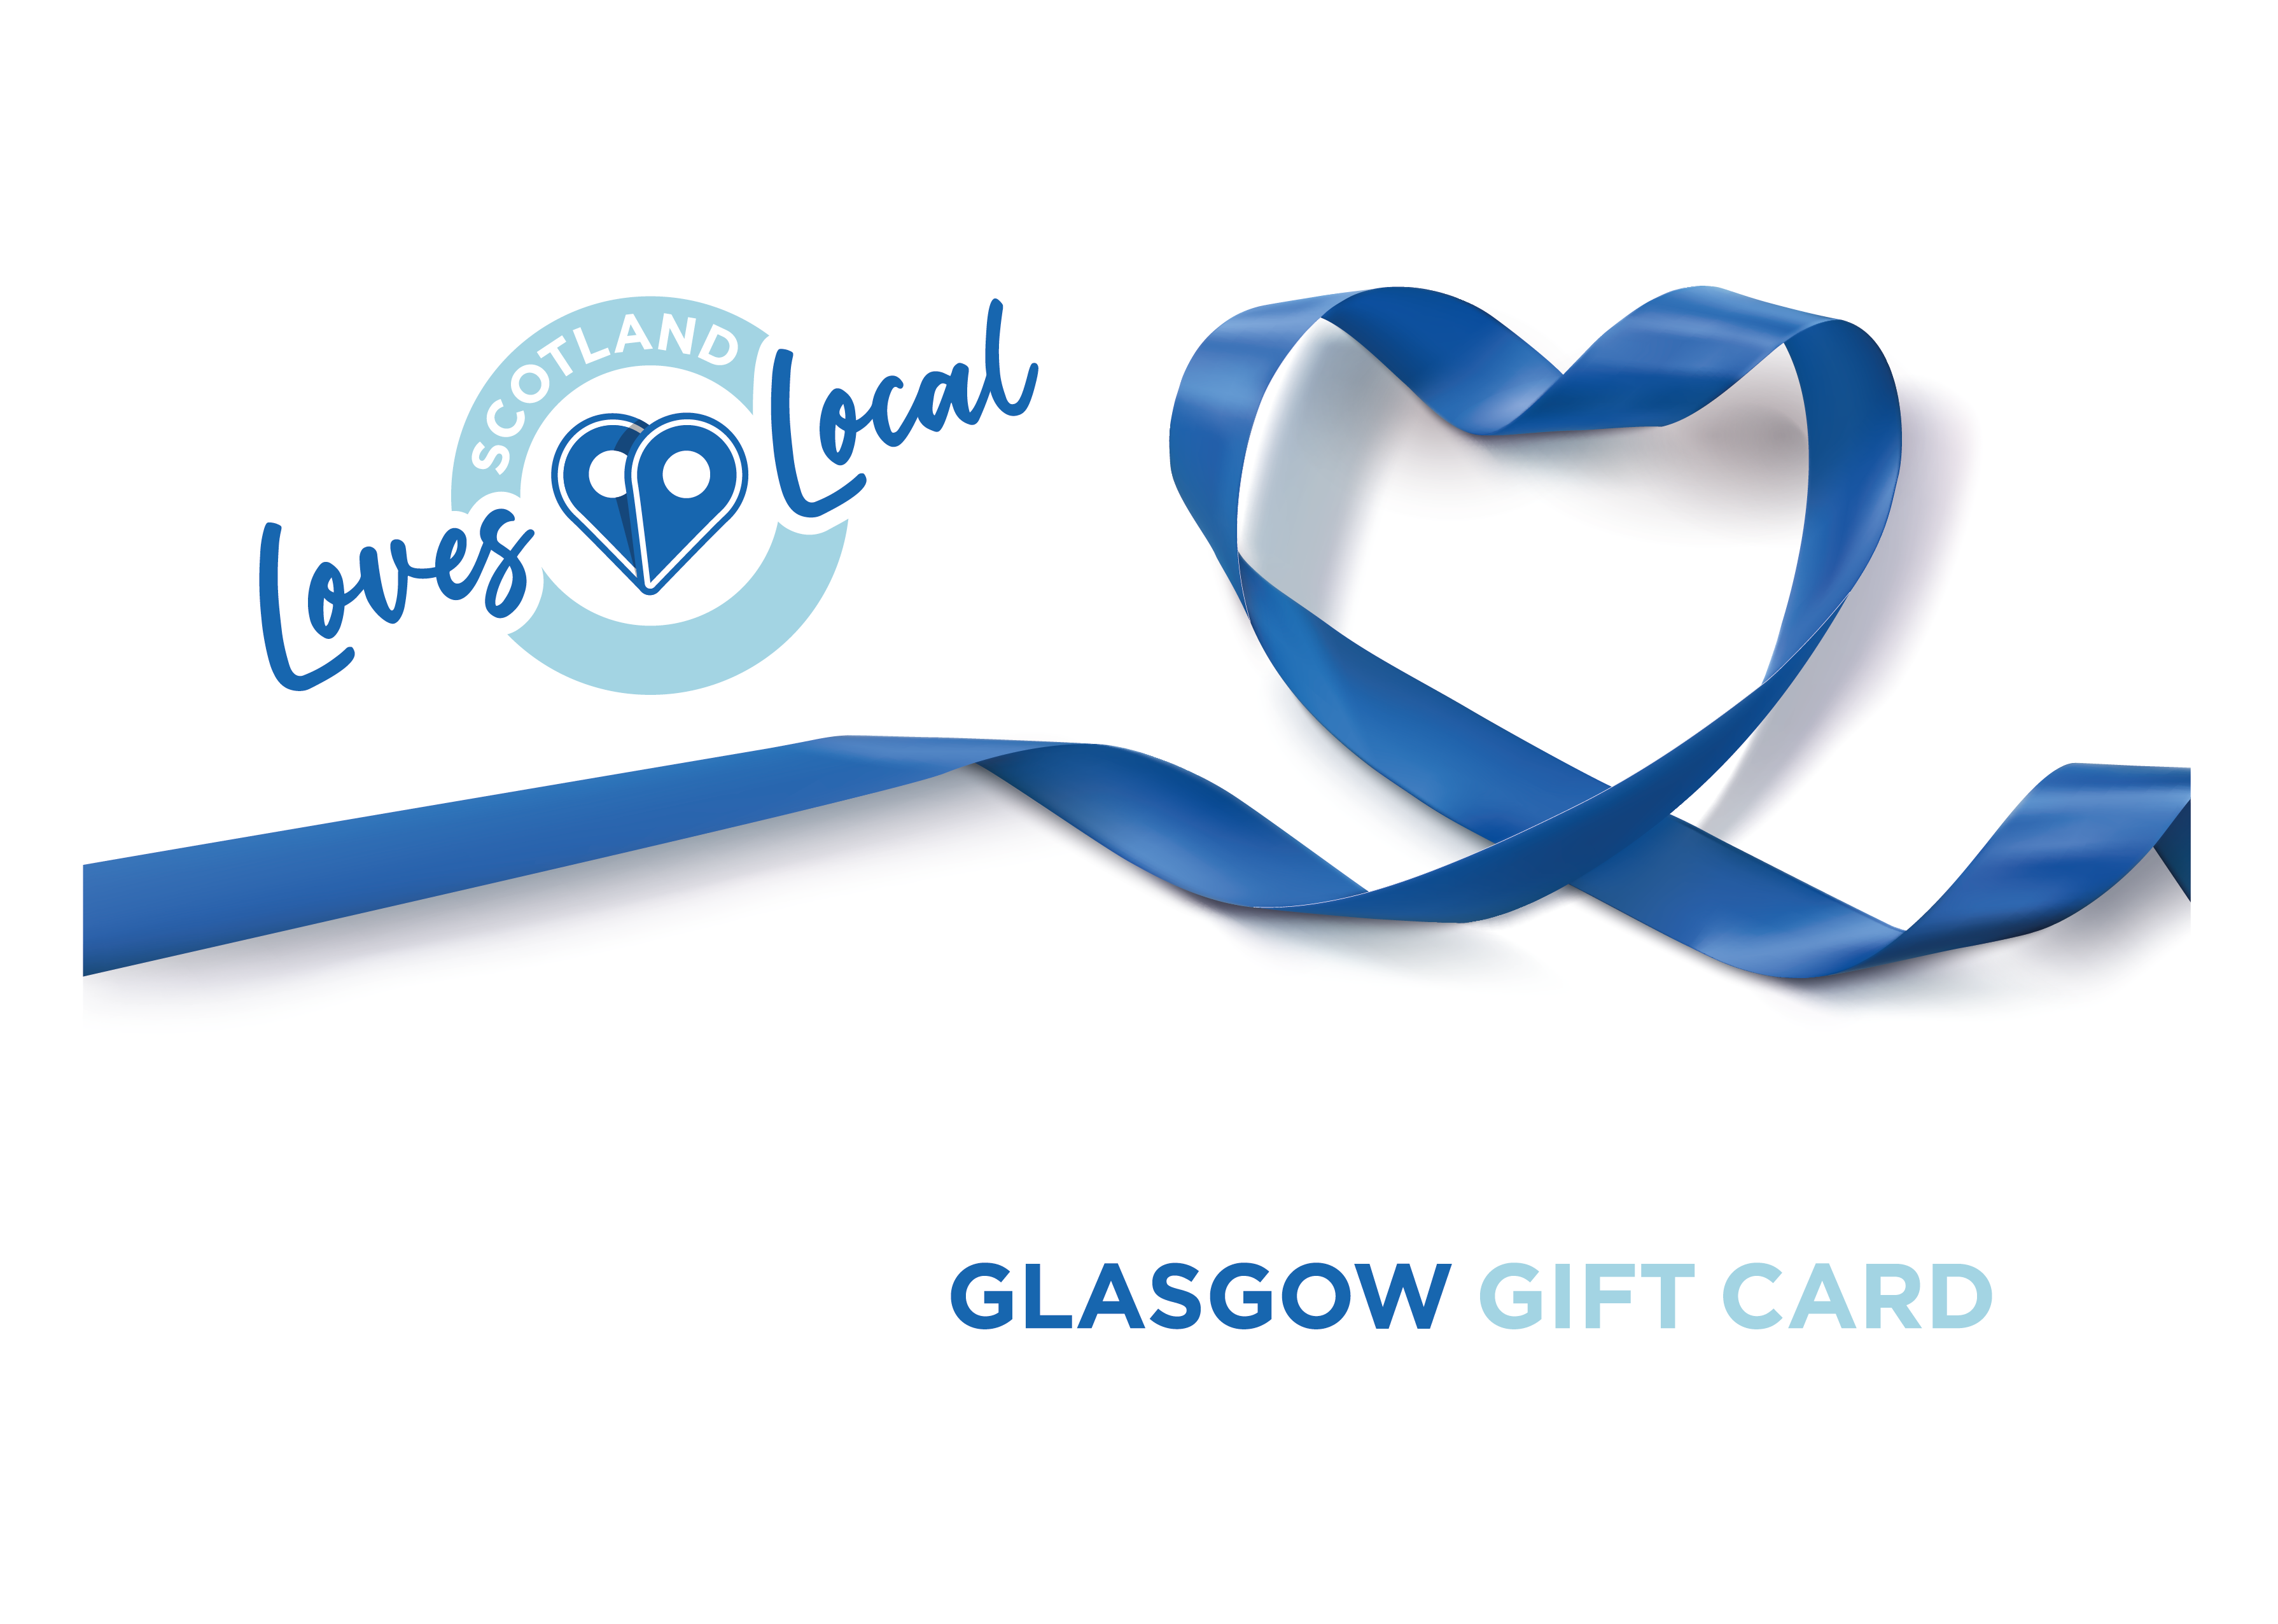 Glasgow Loves Local card scheme is “a fantastic opportunity